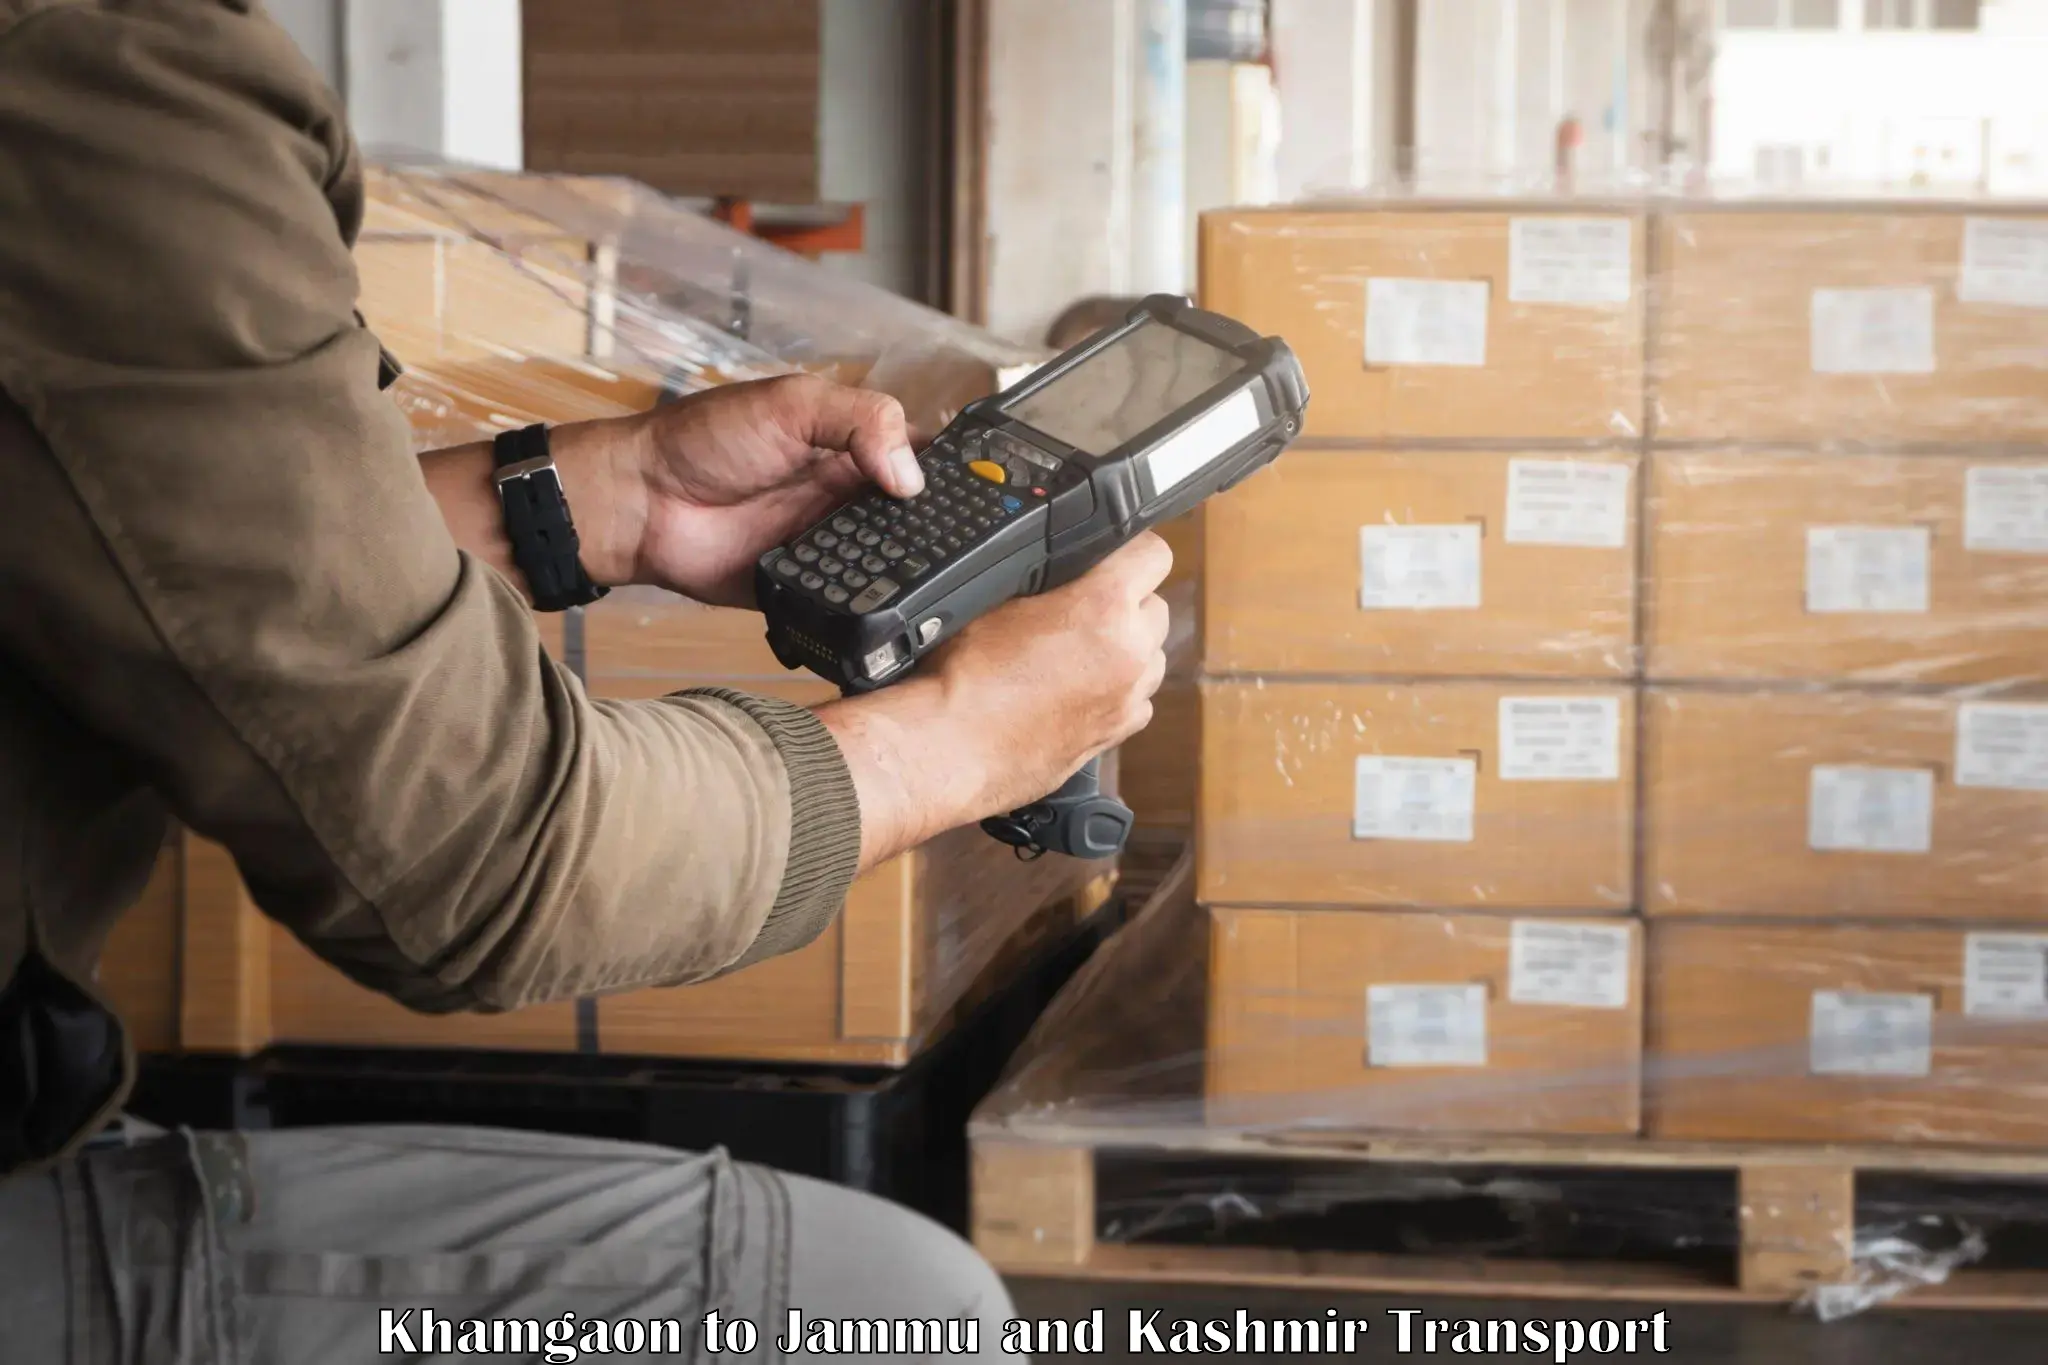 Container transport service Khamgaon to Jammu and Kashmir